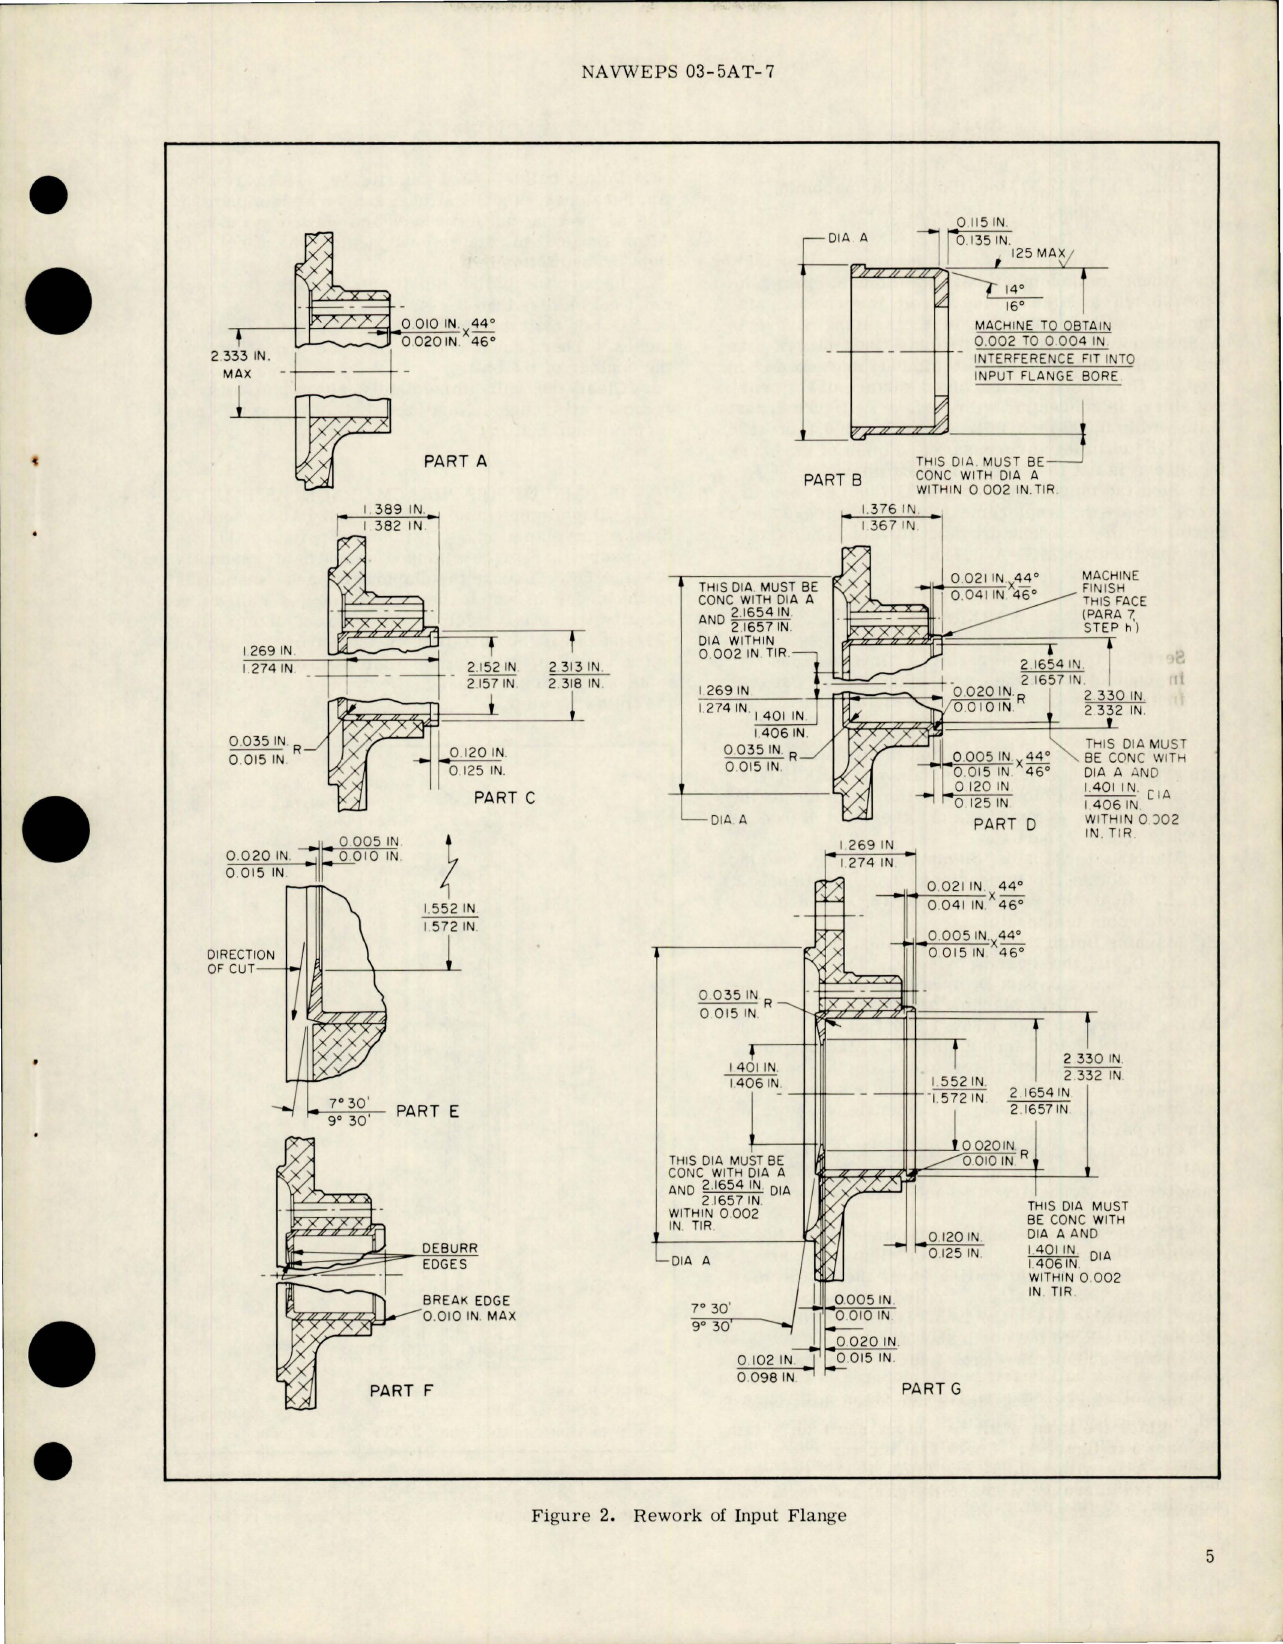 Sample page 7 from AirCorps Library document: Overhaul Instructions with Parts Breakdown for Constant Ratio Power Transmission Shaft